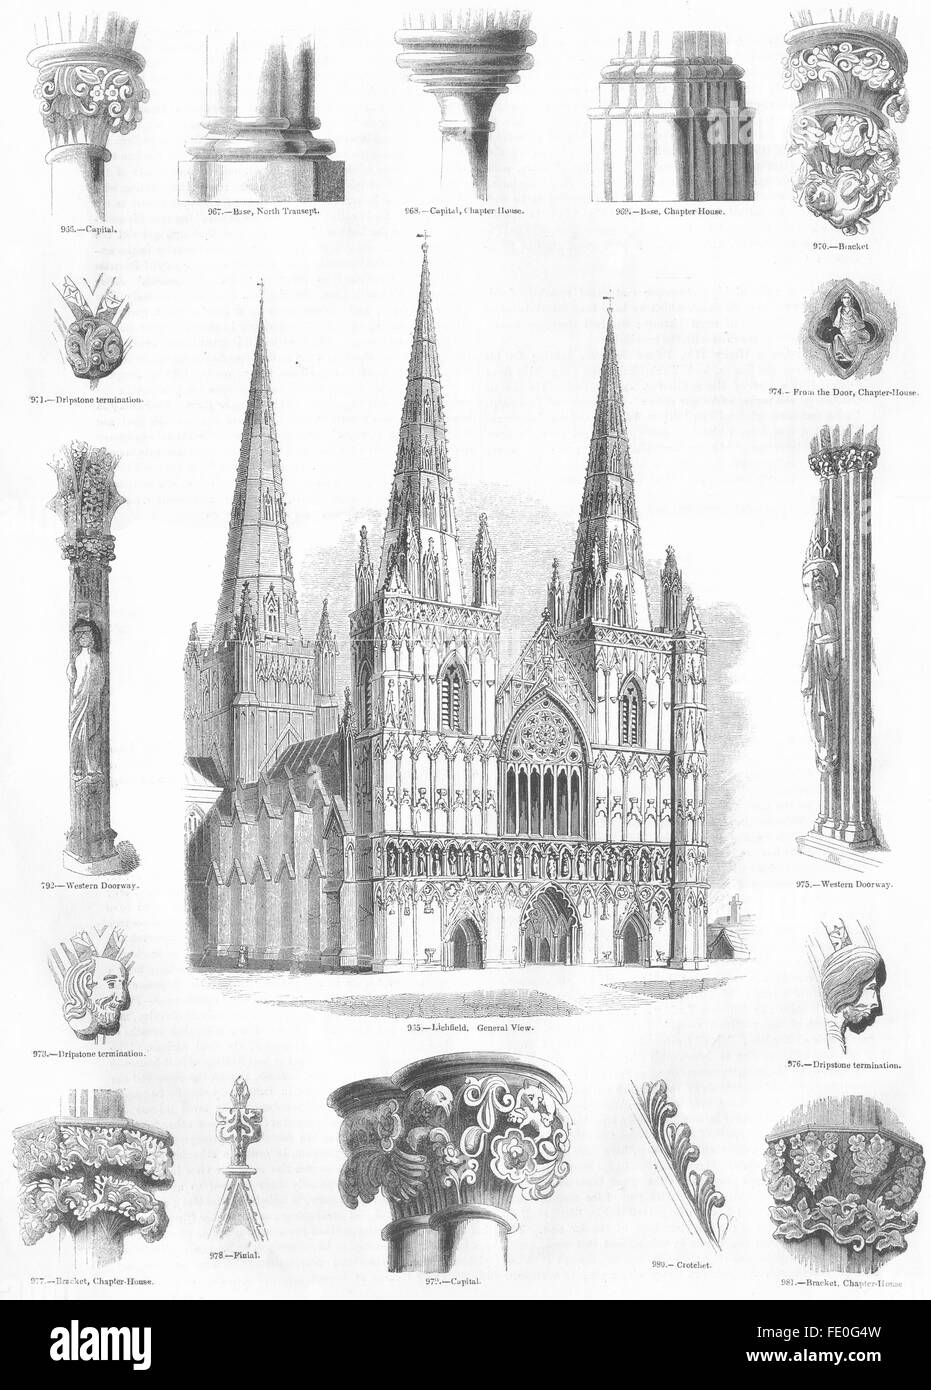 LICHFIELD CATHEDRAL: Finial, Crotchet, Dripstone, antique print 1845 Stock Photo